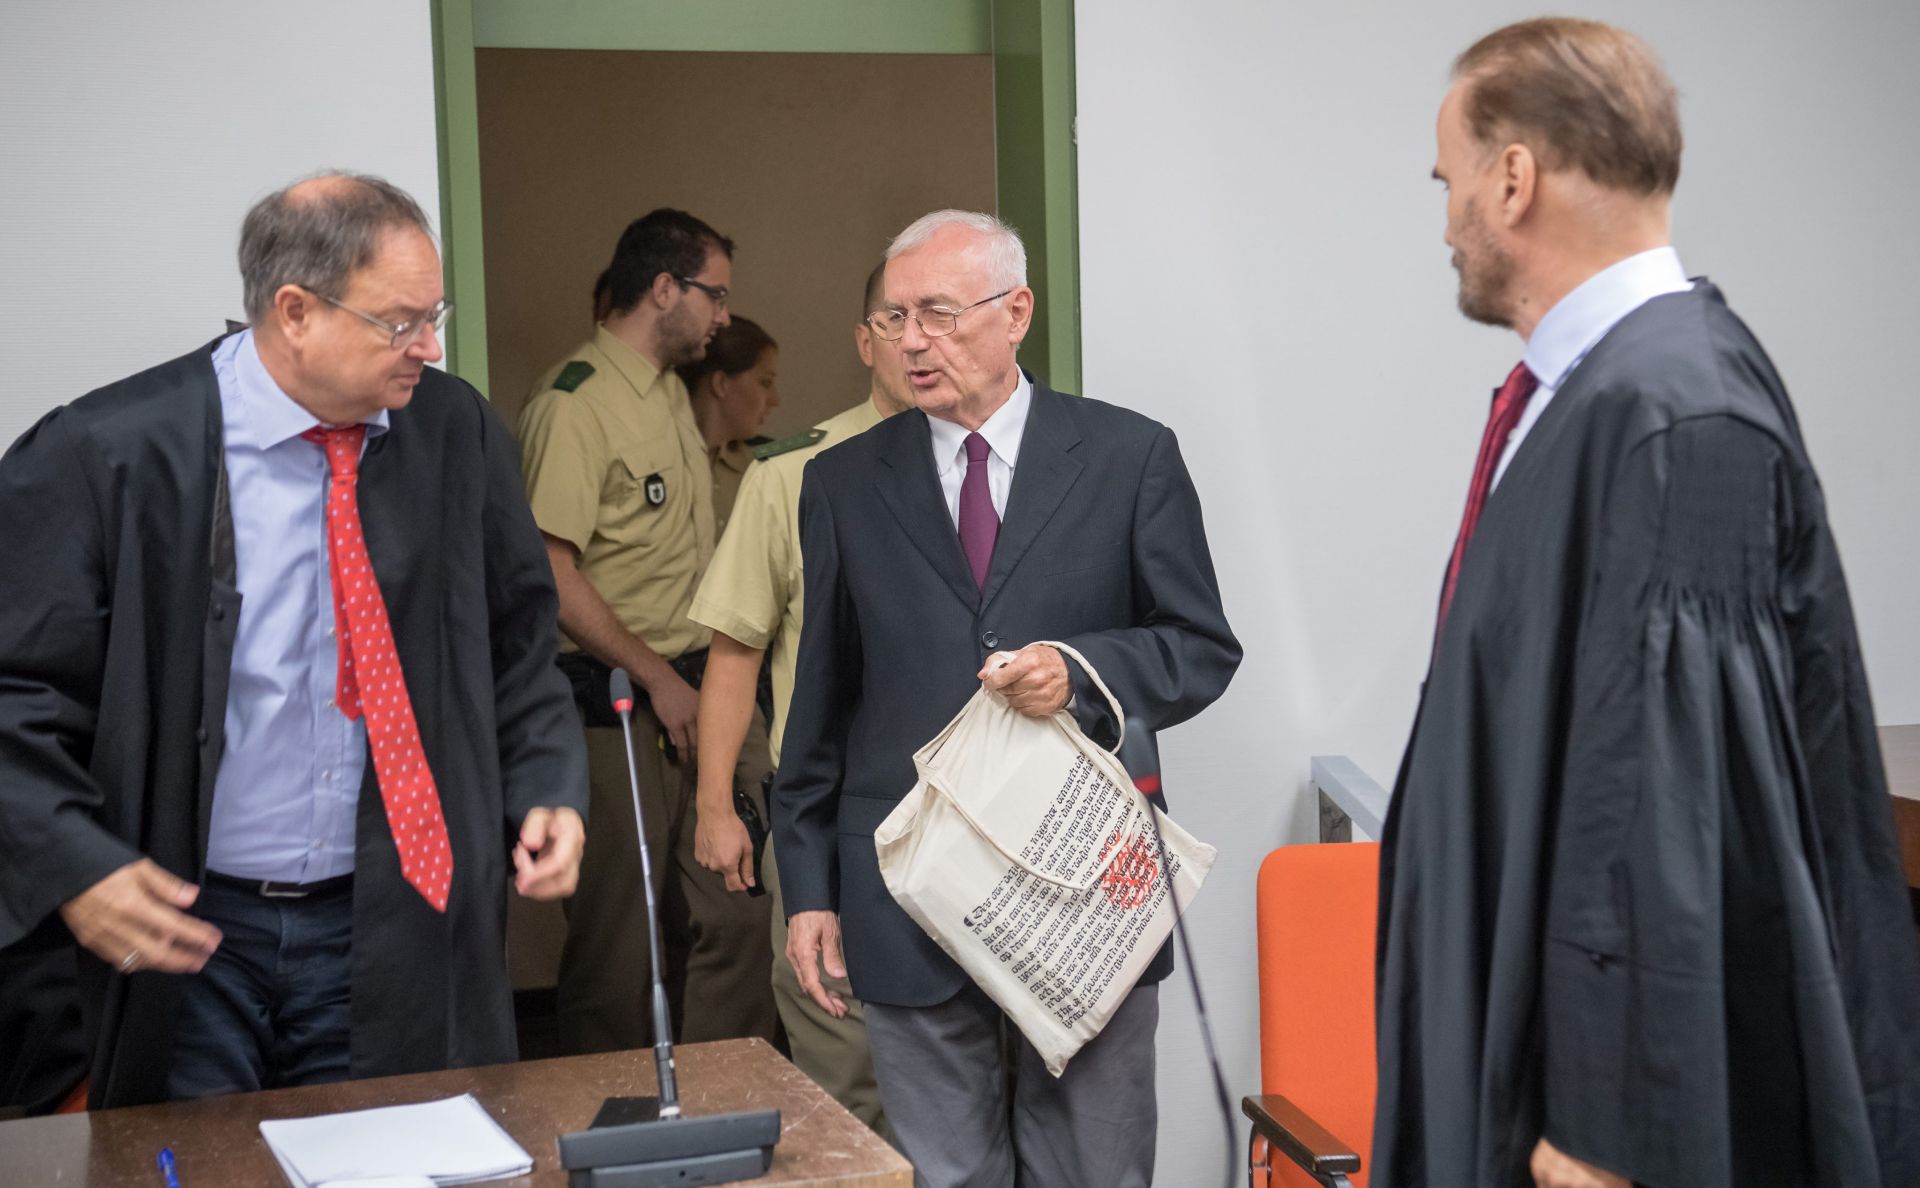 epa05452808 The former head of the Yugoslavian secret service, Zdravko Mustac 
(C), enters the courtroom of the Higher Regional Court in Munich, Germany, 03 August 2016.  The verdict in the trial for the violent death of an exiled Croatian 33 years ago, will be announced on 03 August. For 21 months a state security senate with the Munich Higher Regional Court had been holding trial against the head of the former Yugoslavian secret service SDS and a department head for accessory to murder.  EPA/PETER KNEFFEL